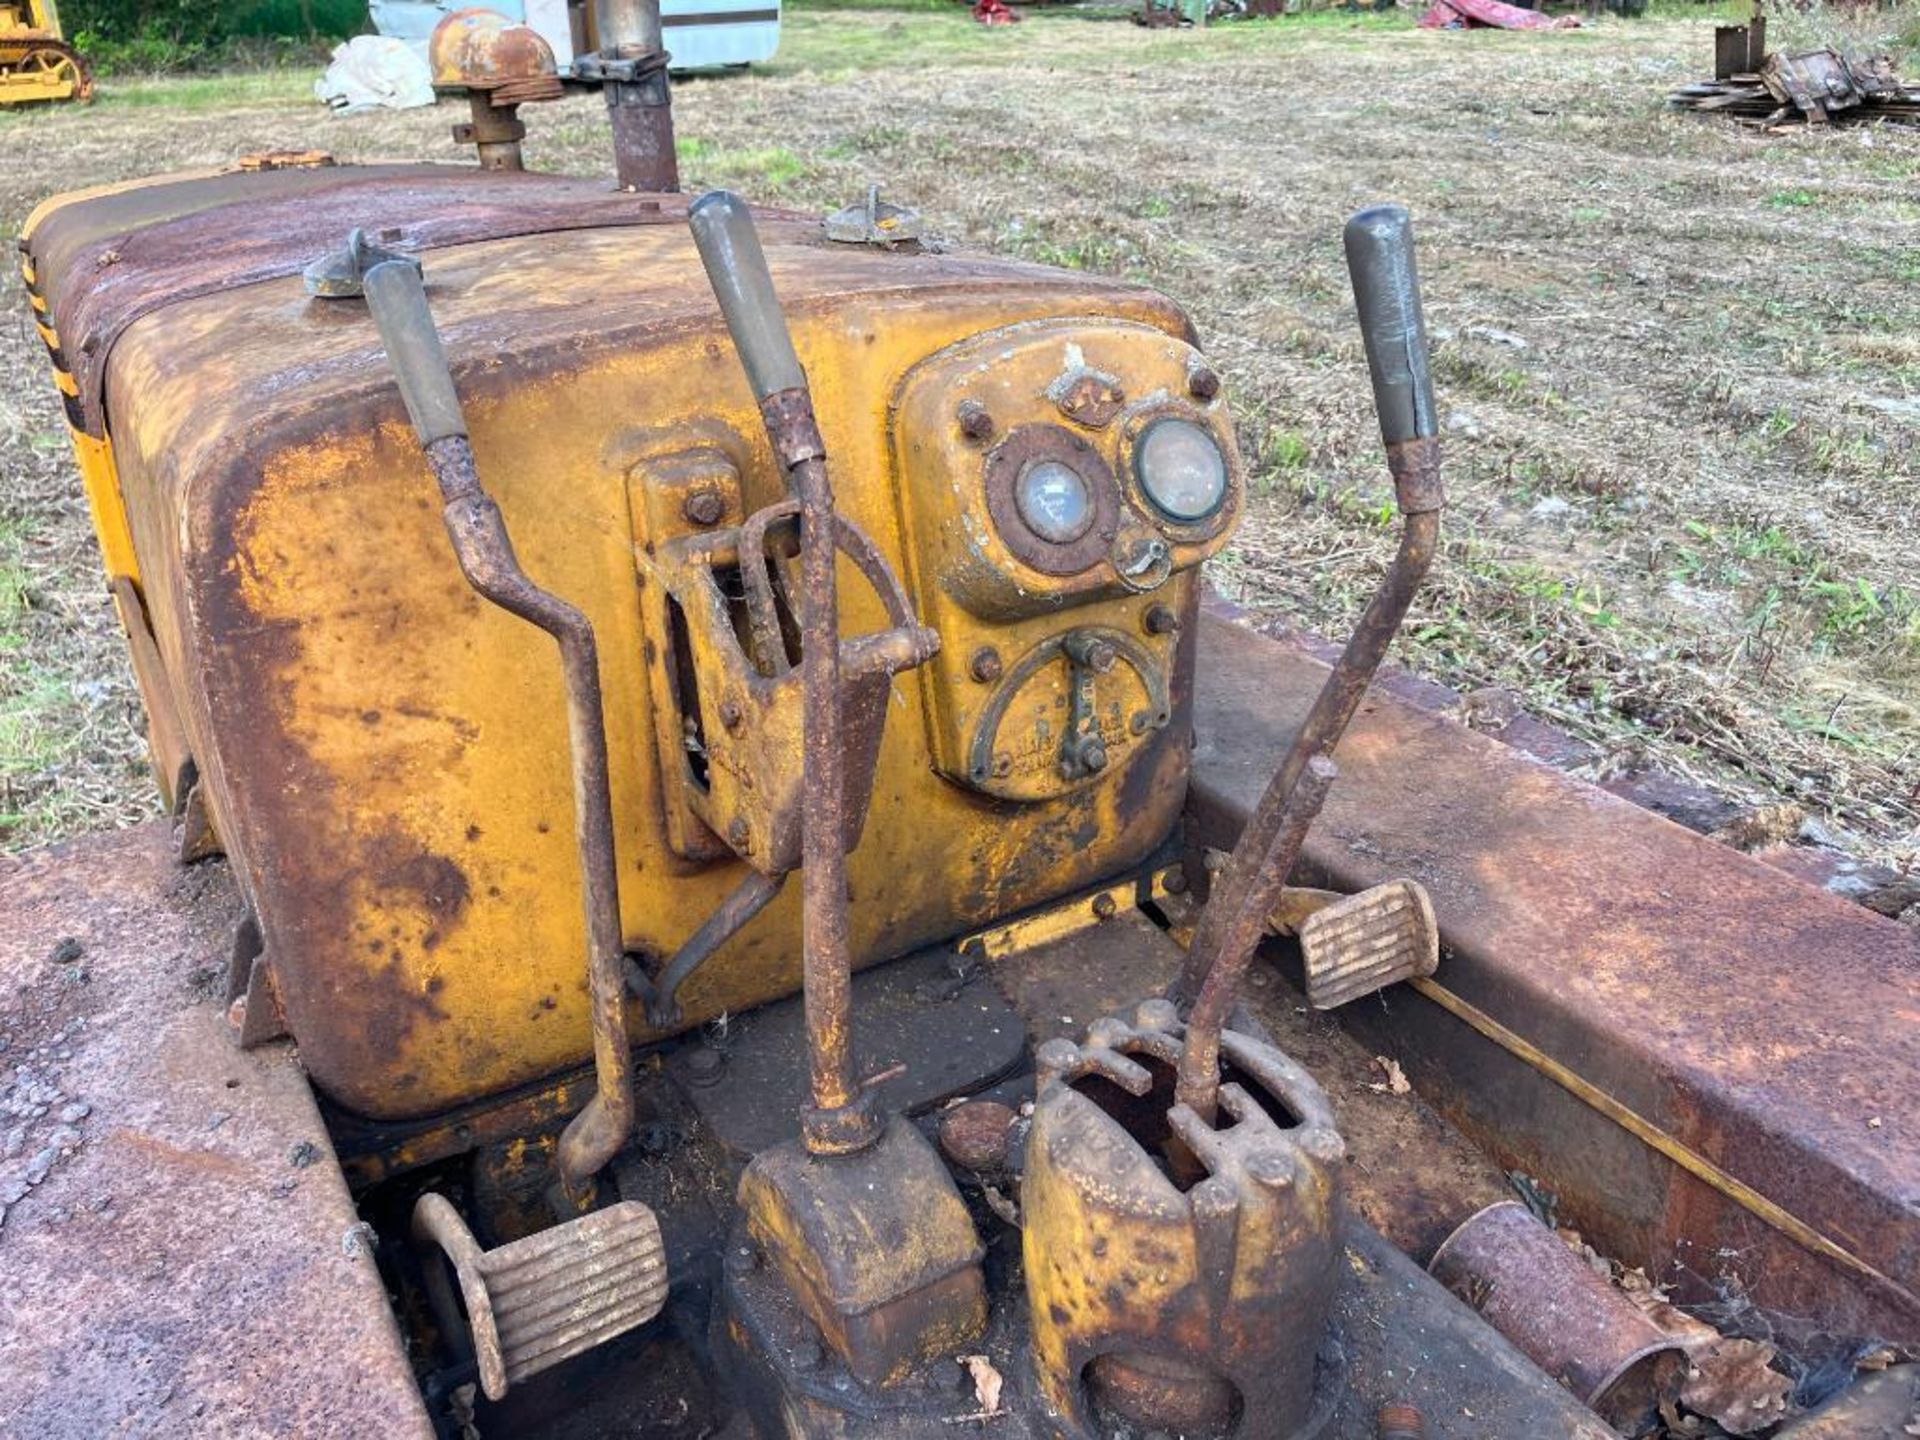 1939 Caterpillar R4 metal tracked crawler with 16" tracks and swinging drawbar. Serial No: 6G1021WS - Image 9 of 14